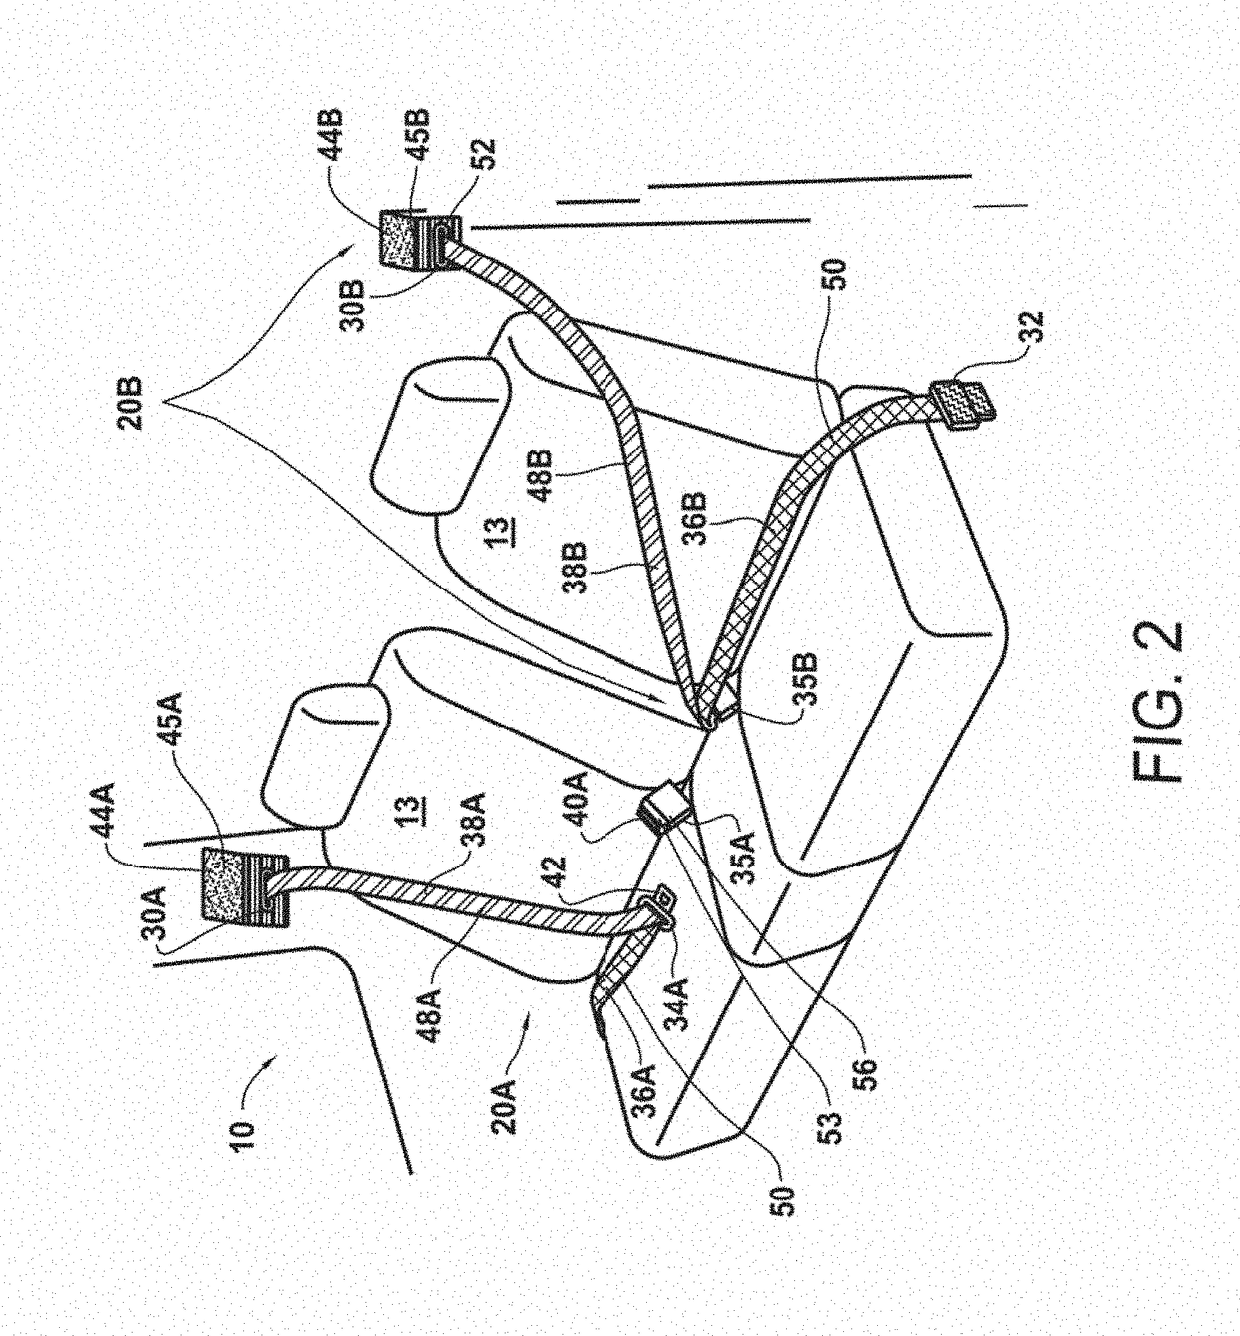 Detection and Monitoring of Occupant Seat Belt